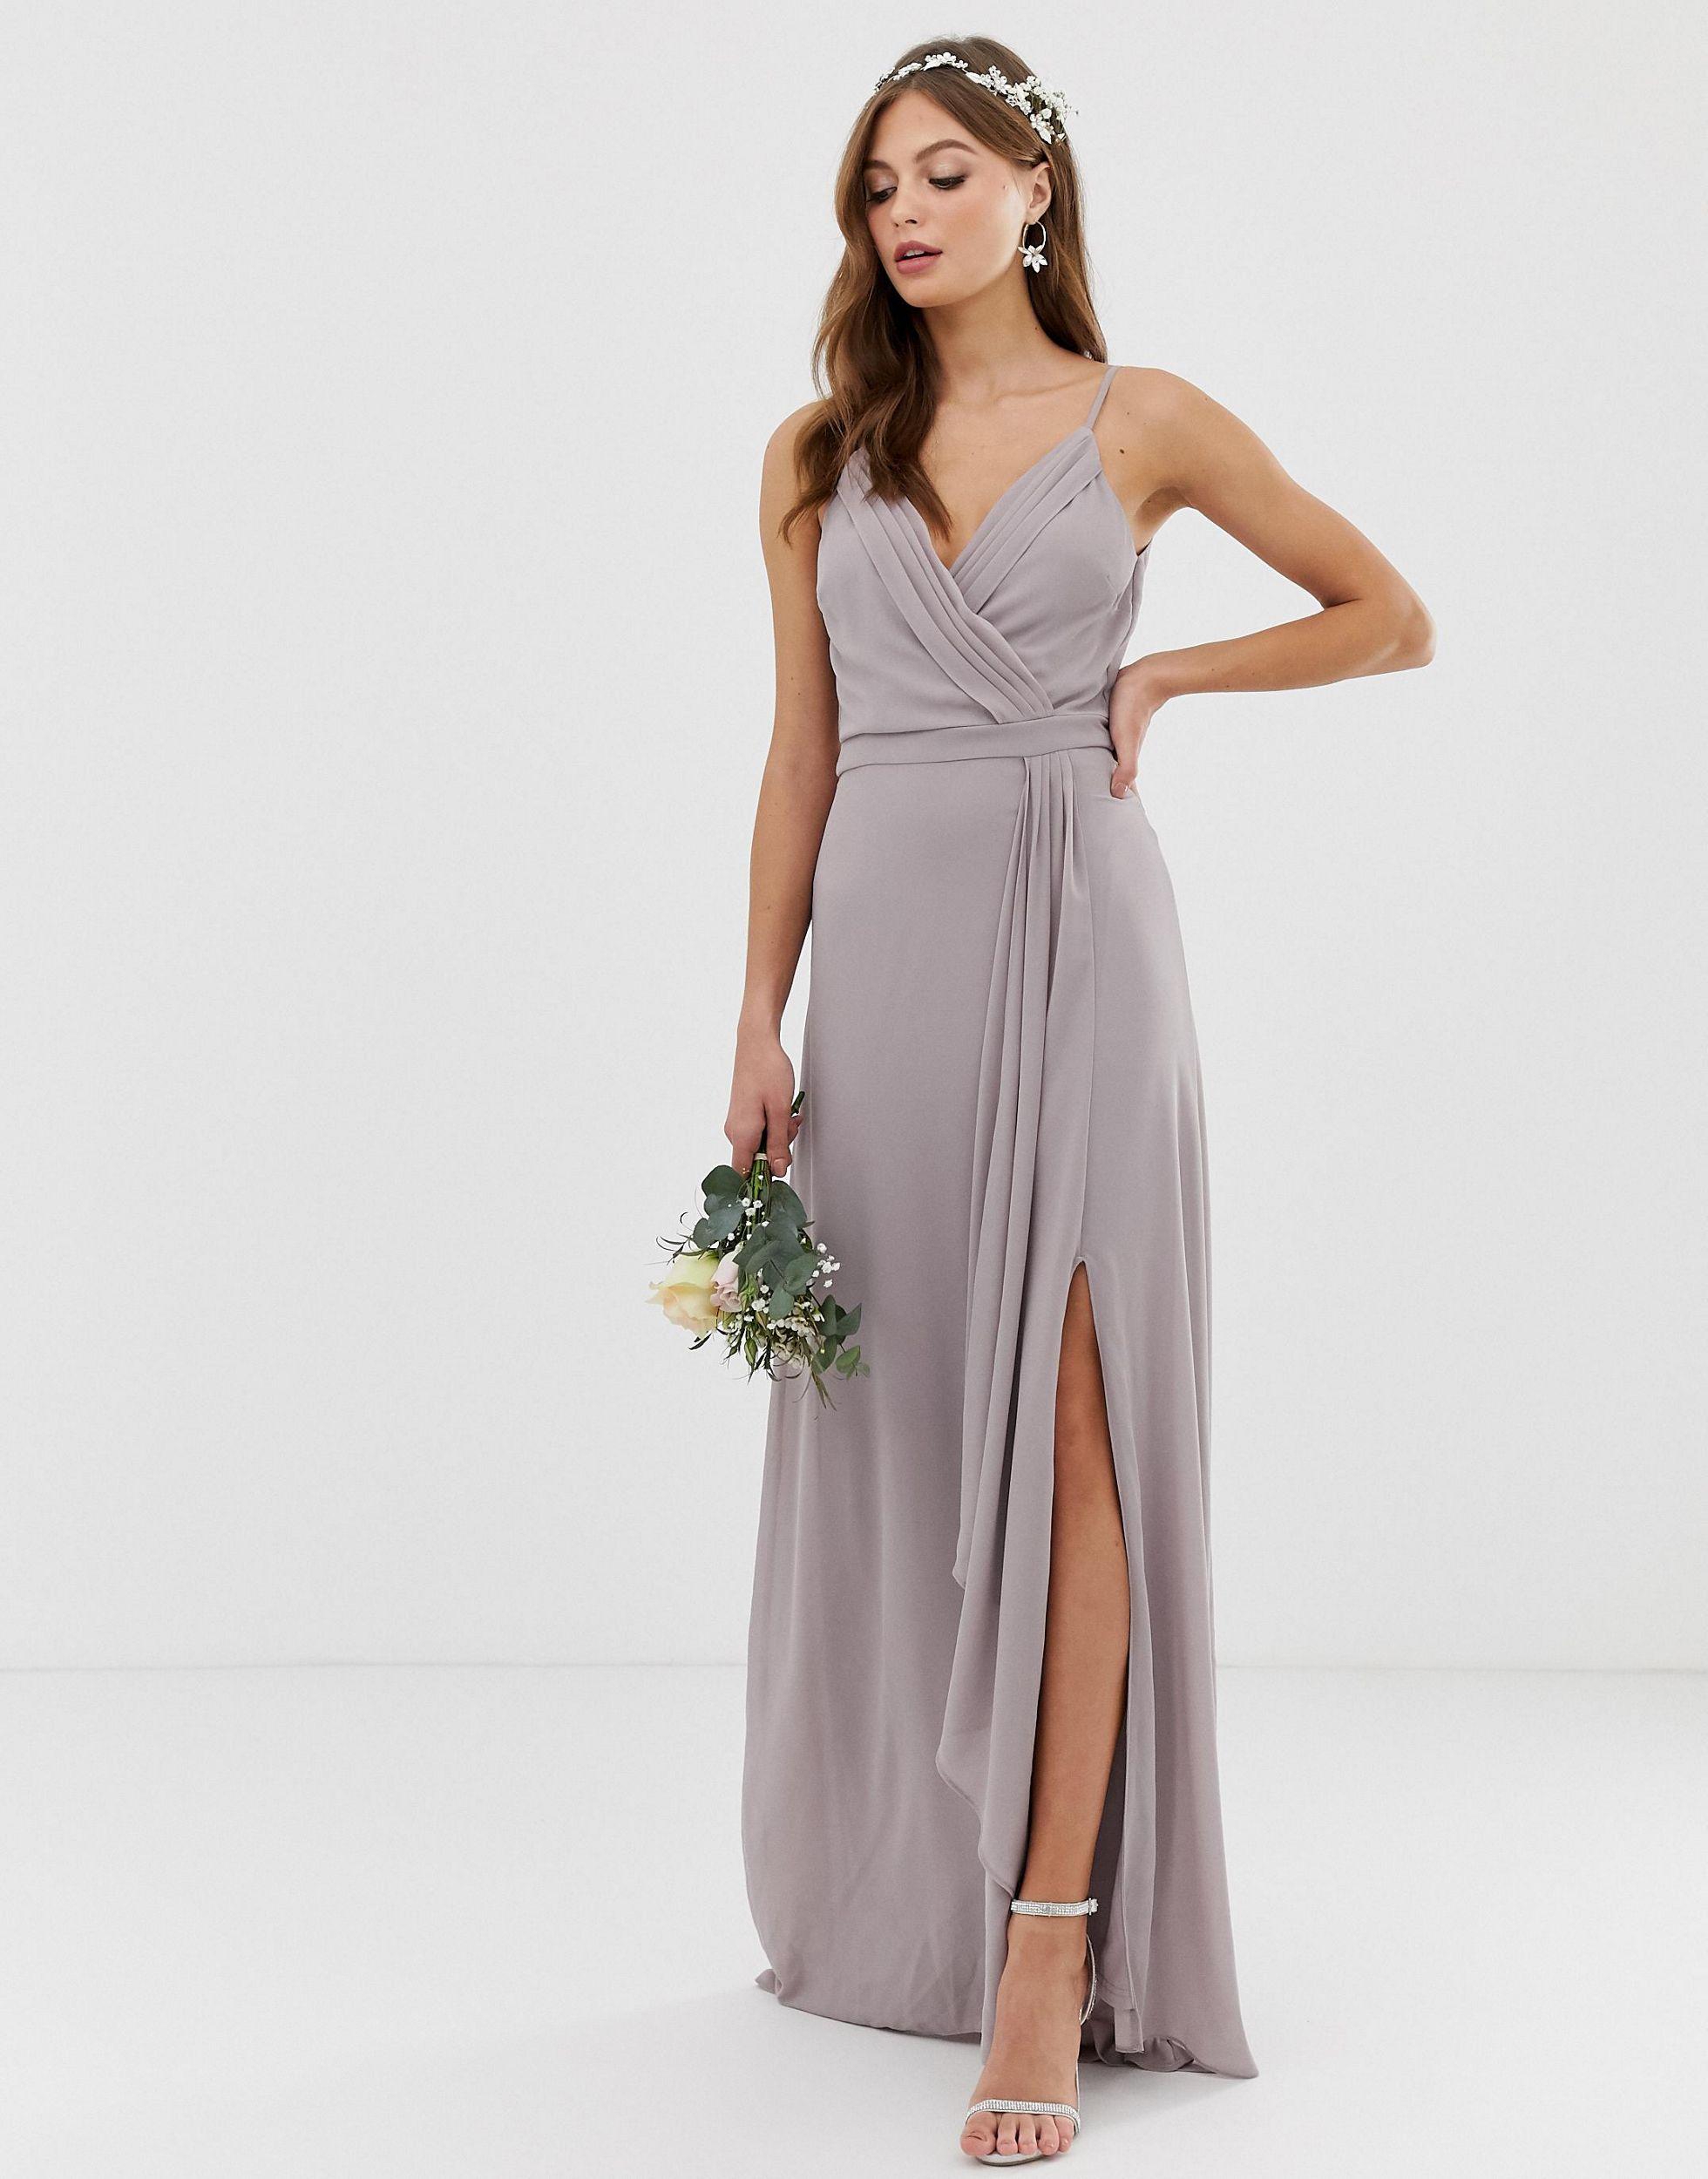 copper colored mother of the bride dresses